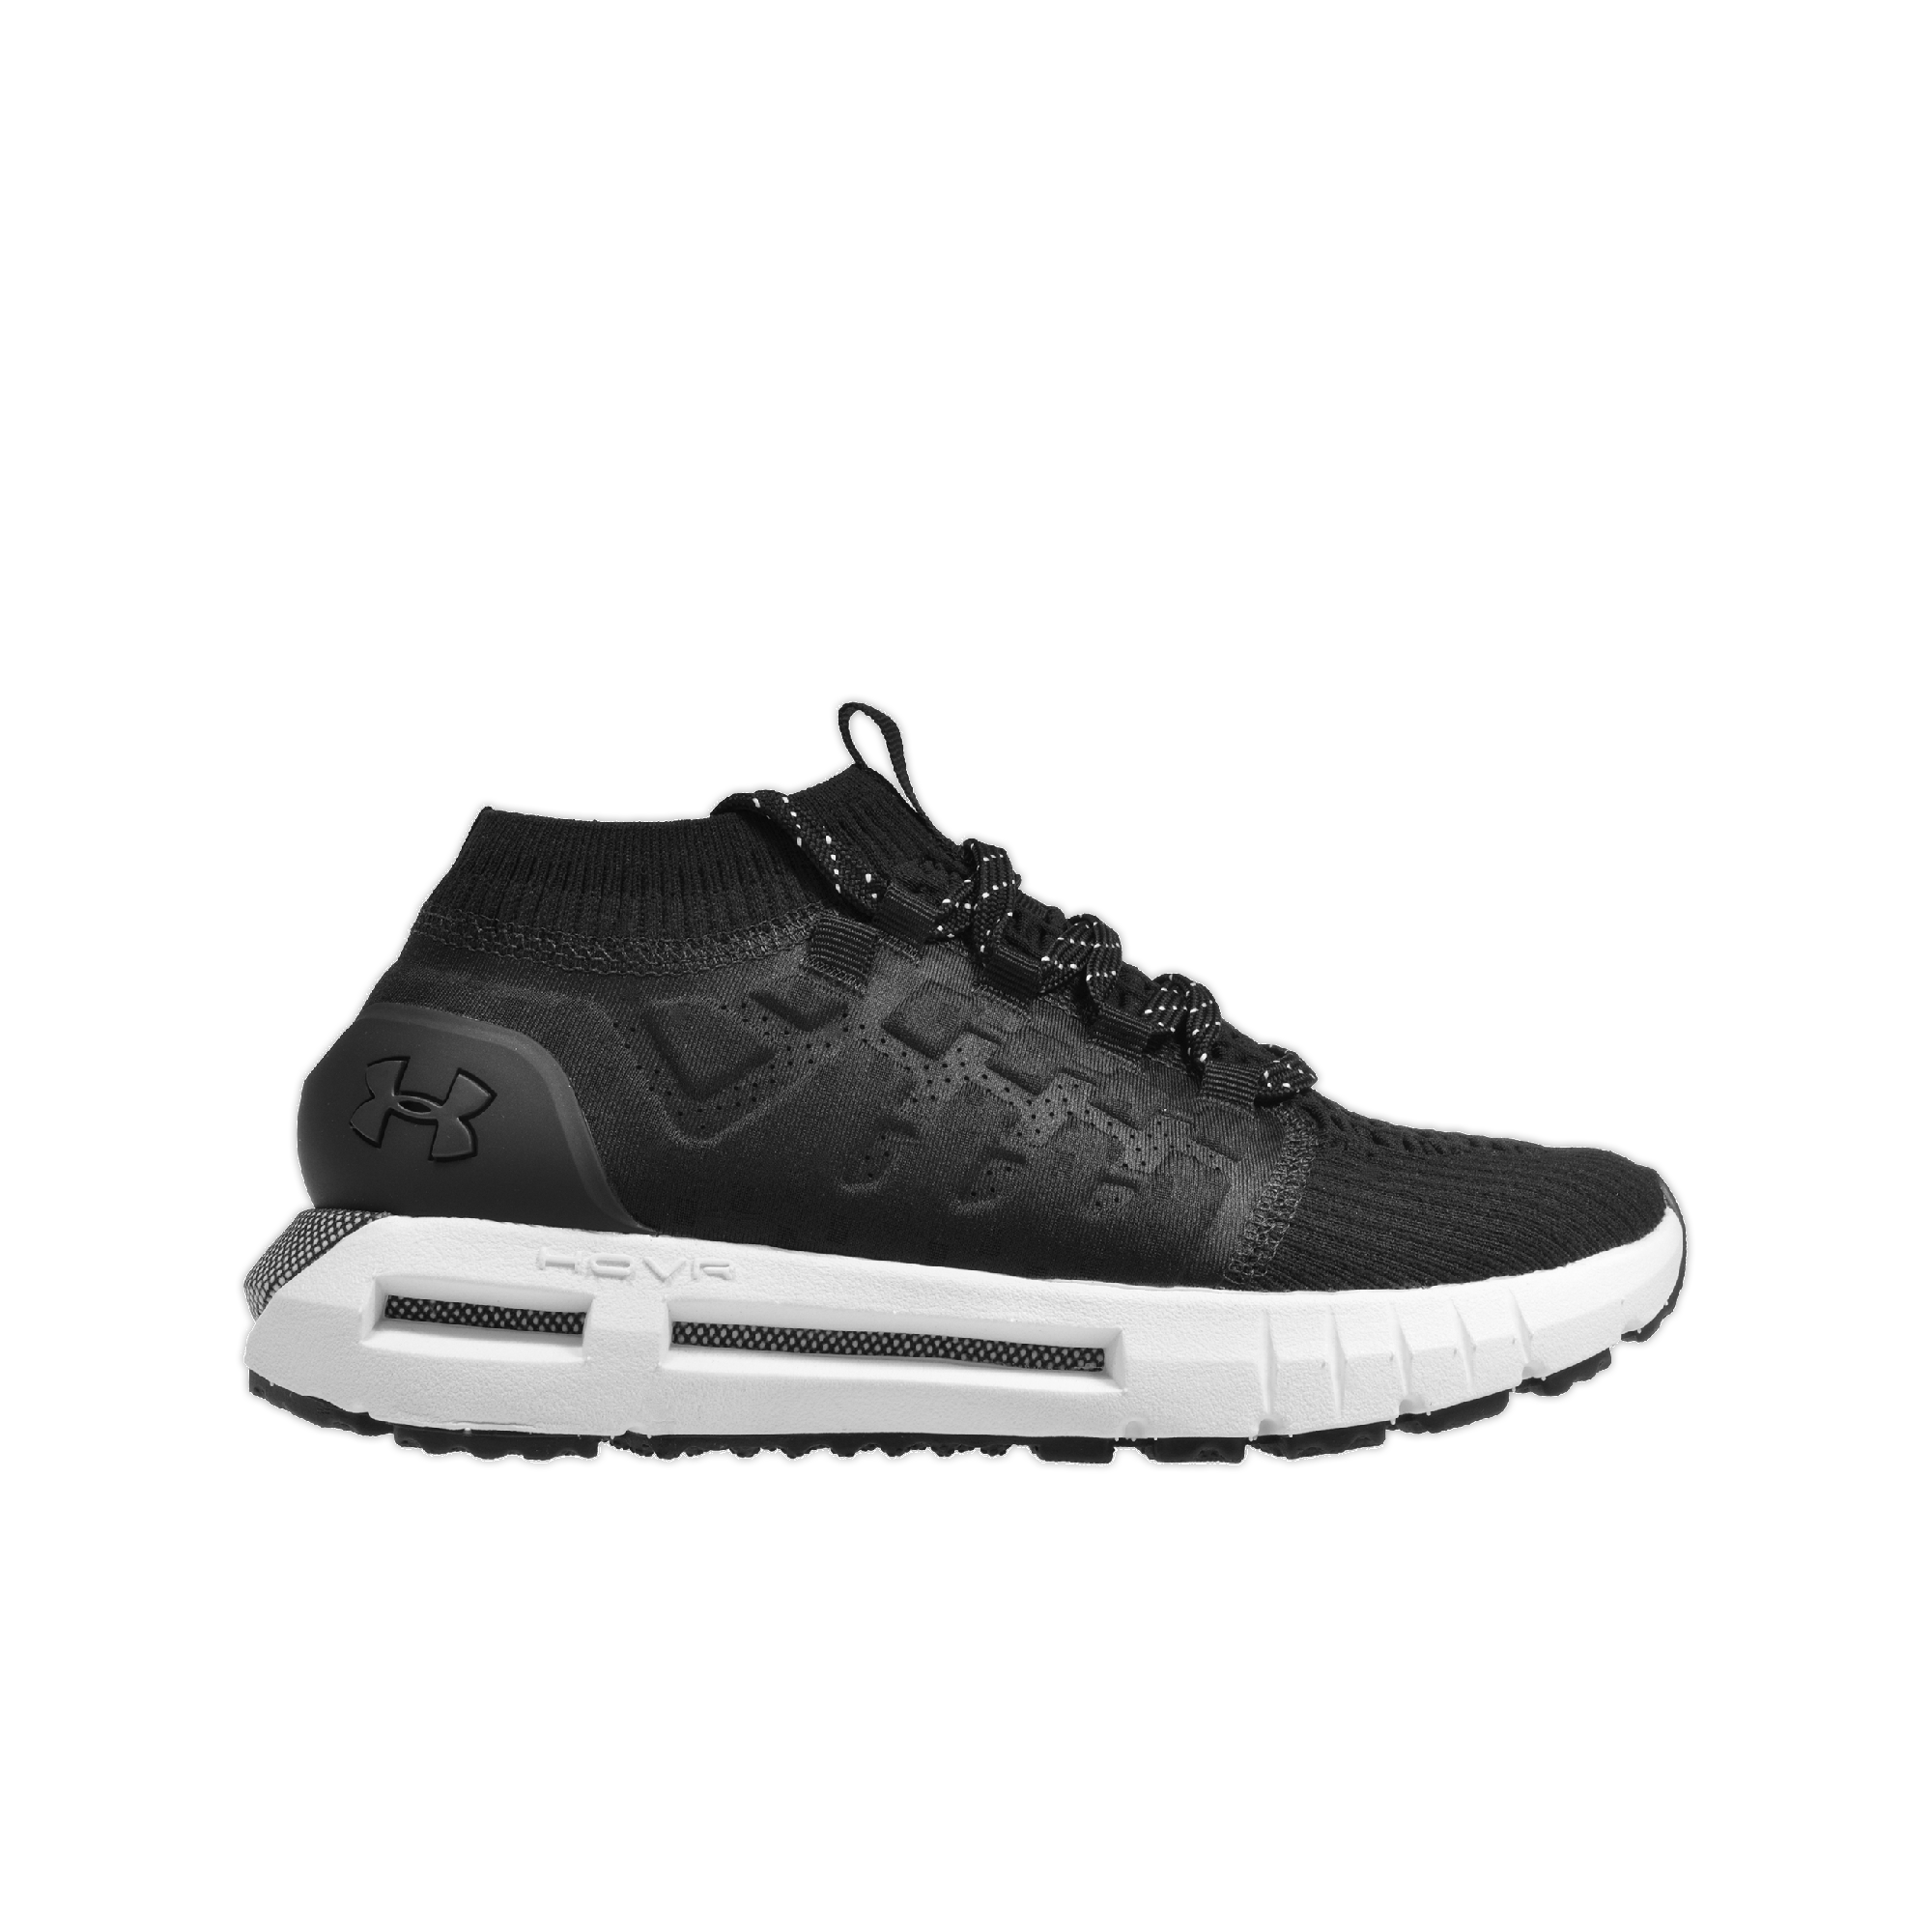 under armour hovr black and white